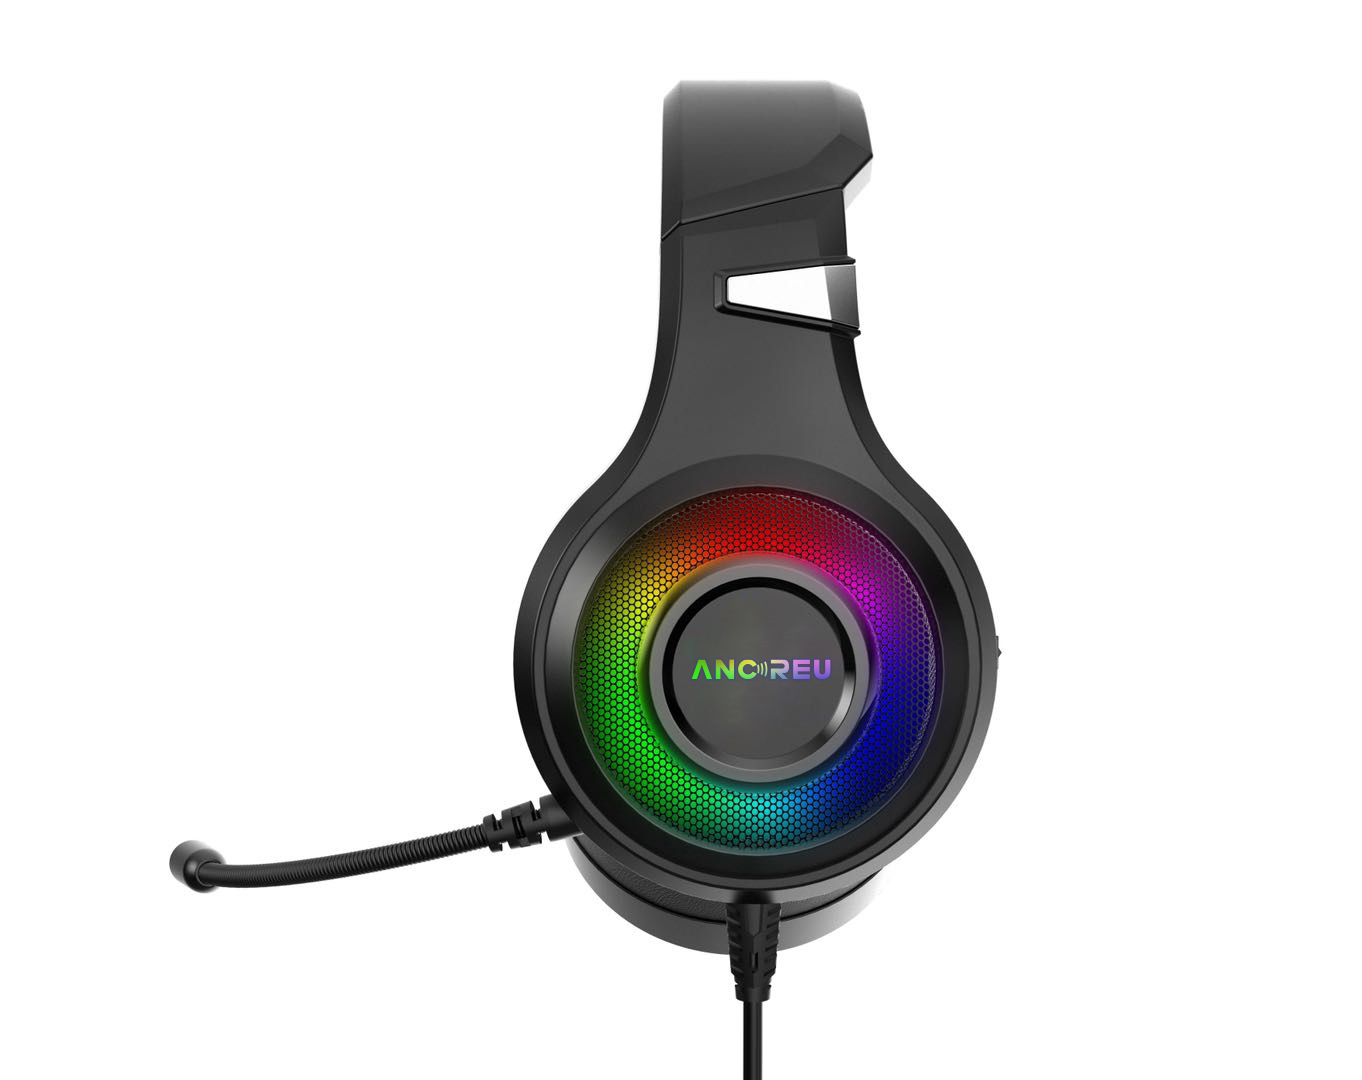 Factory Best Wired Headphones for Gaming RGB